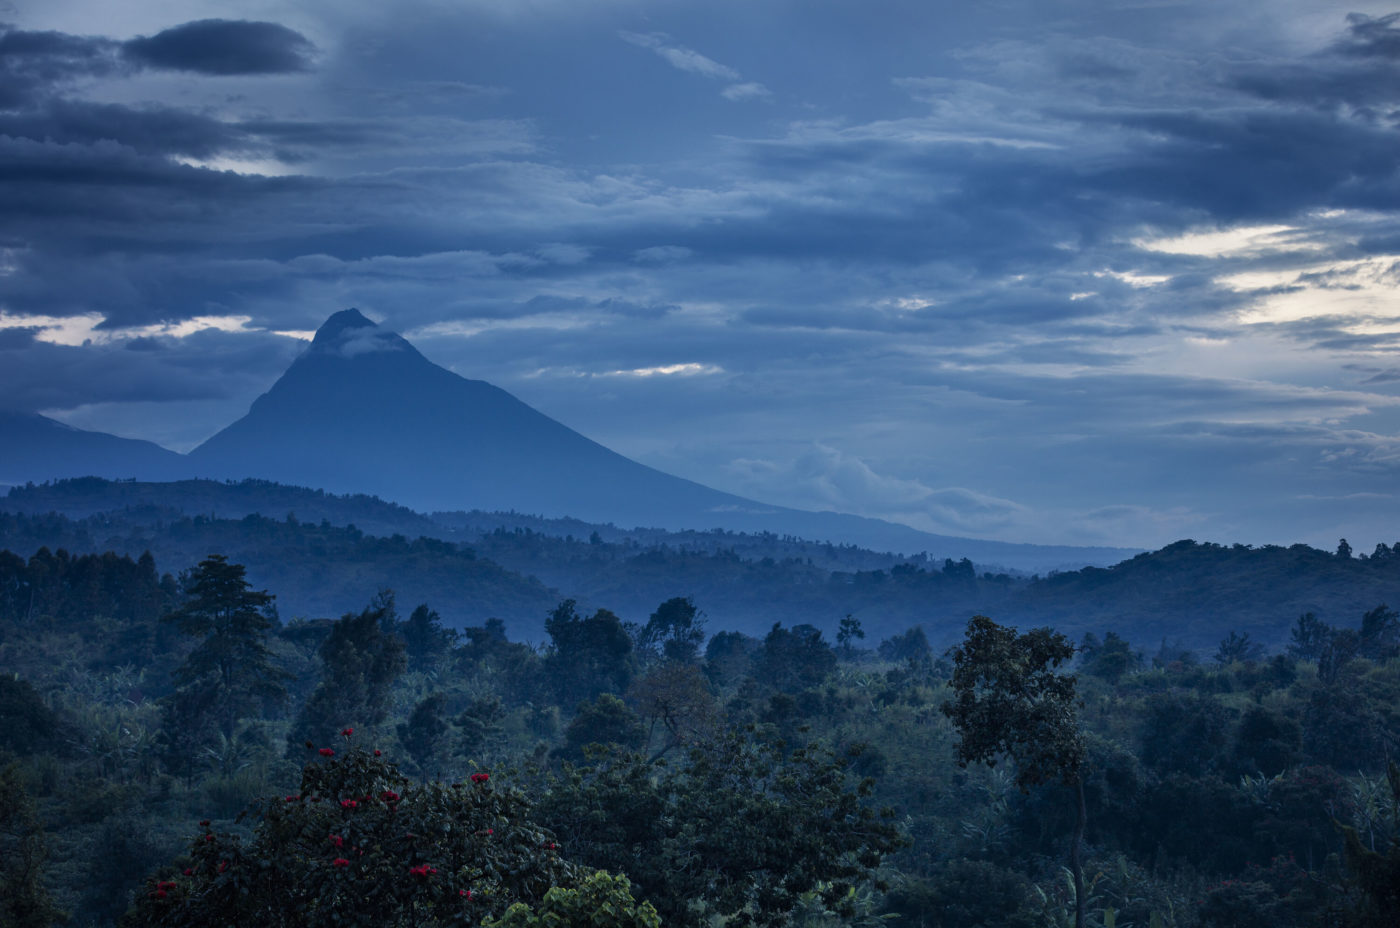 A scenic image of the rainforest and volcanoes of Virunga Park